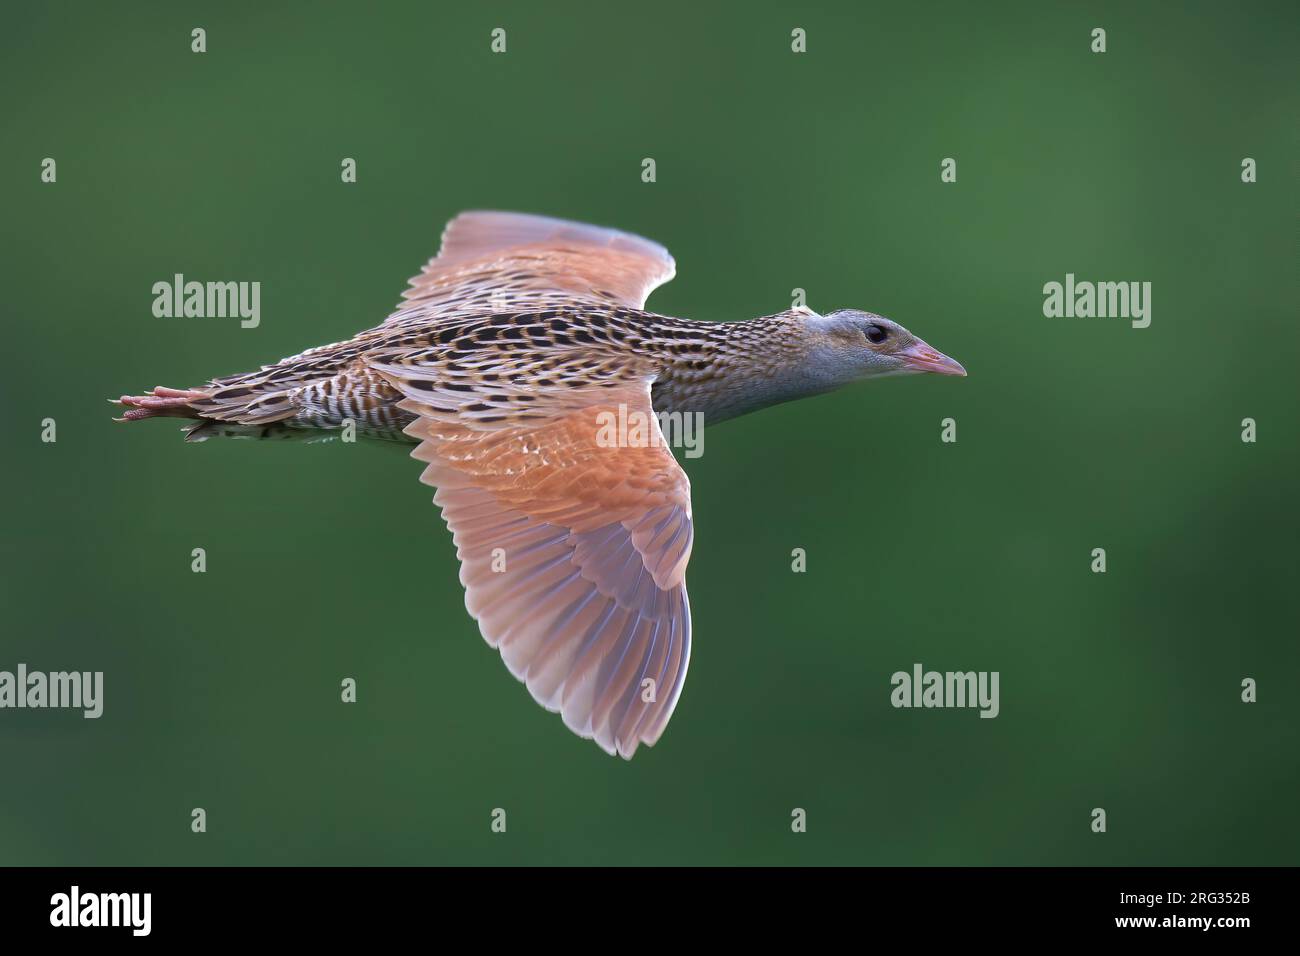 Adult male Corncrake (Crex crex) flying, side view of bird showing upperparts against green background Stock Photo